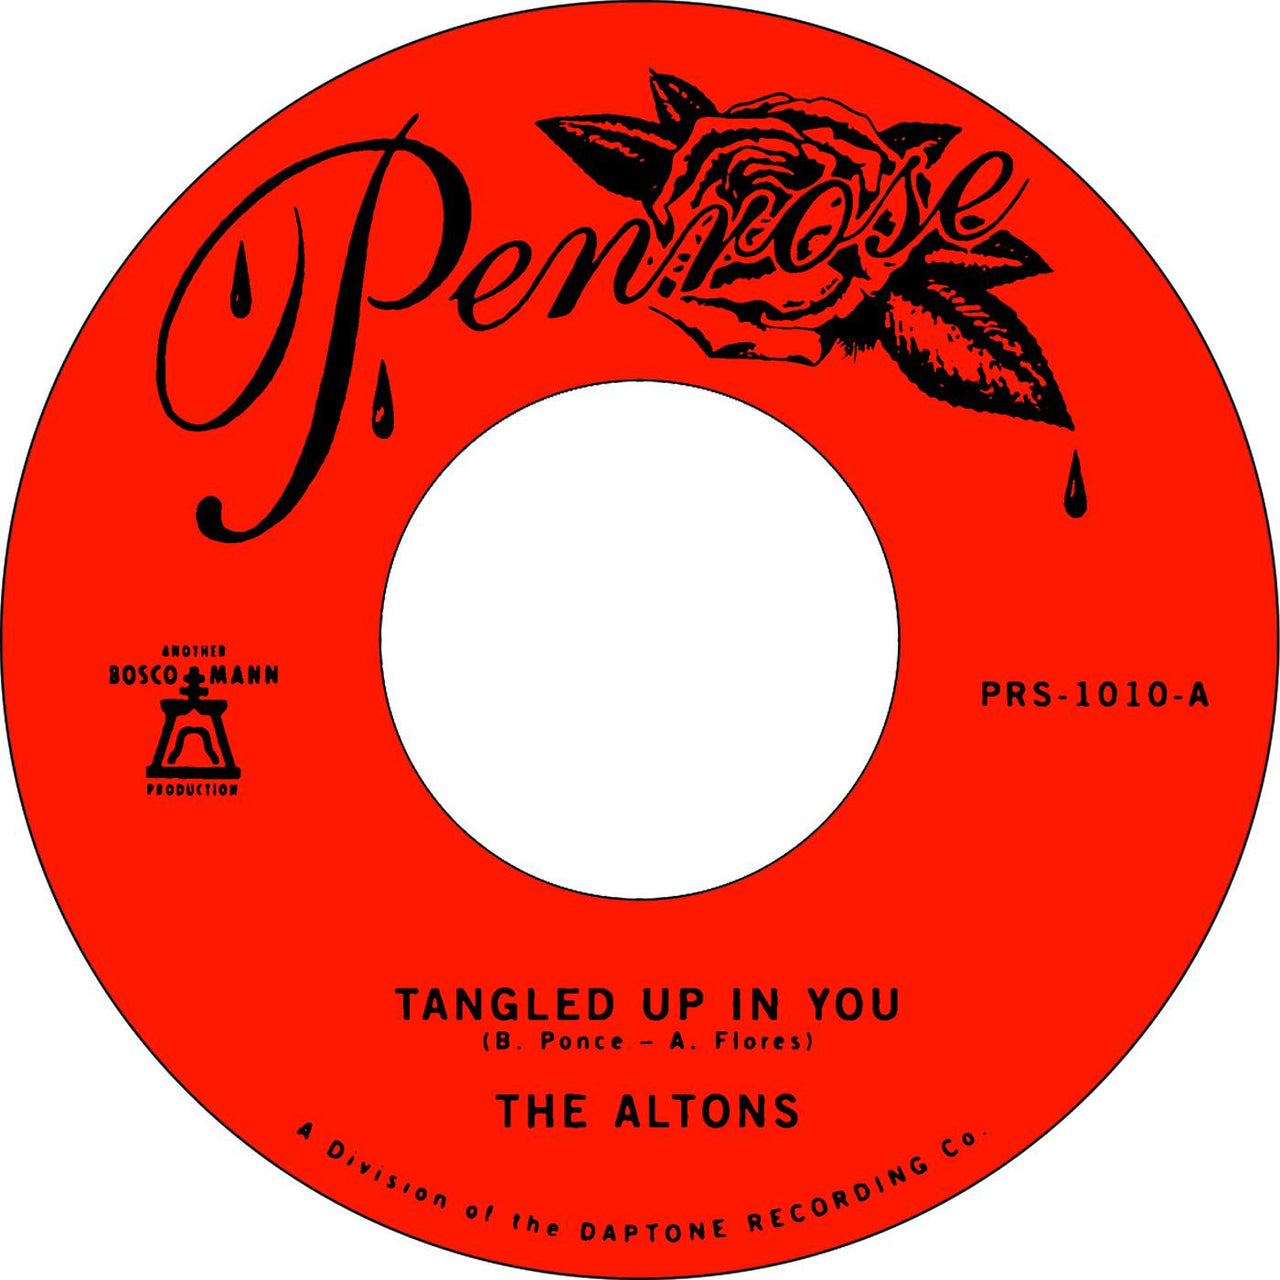 Tangled Up In You b/w Soon Enough (New 7")